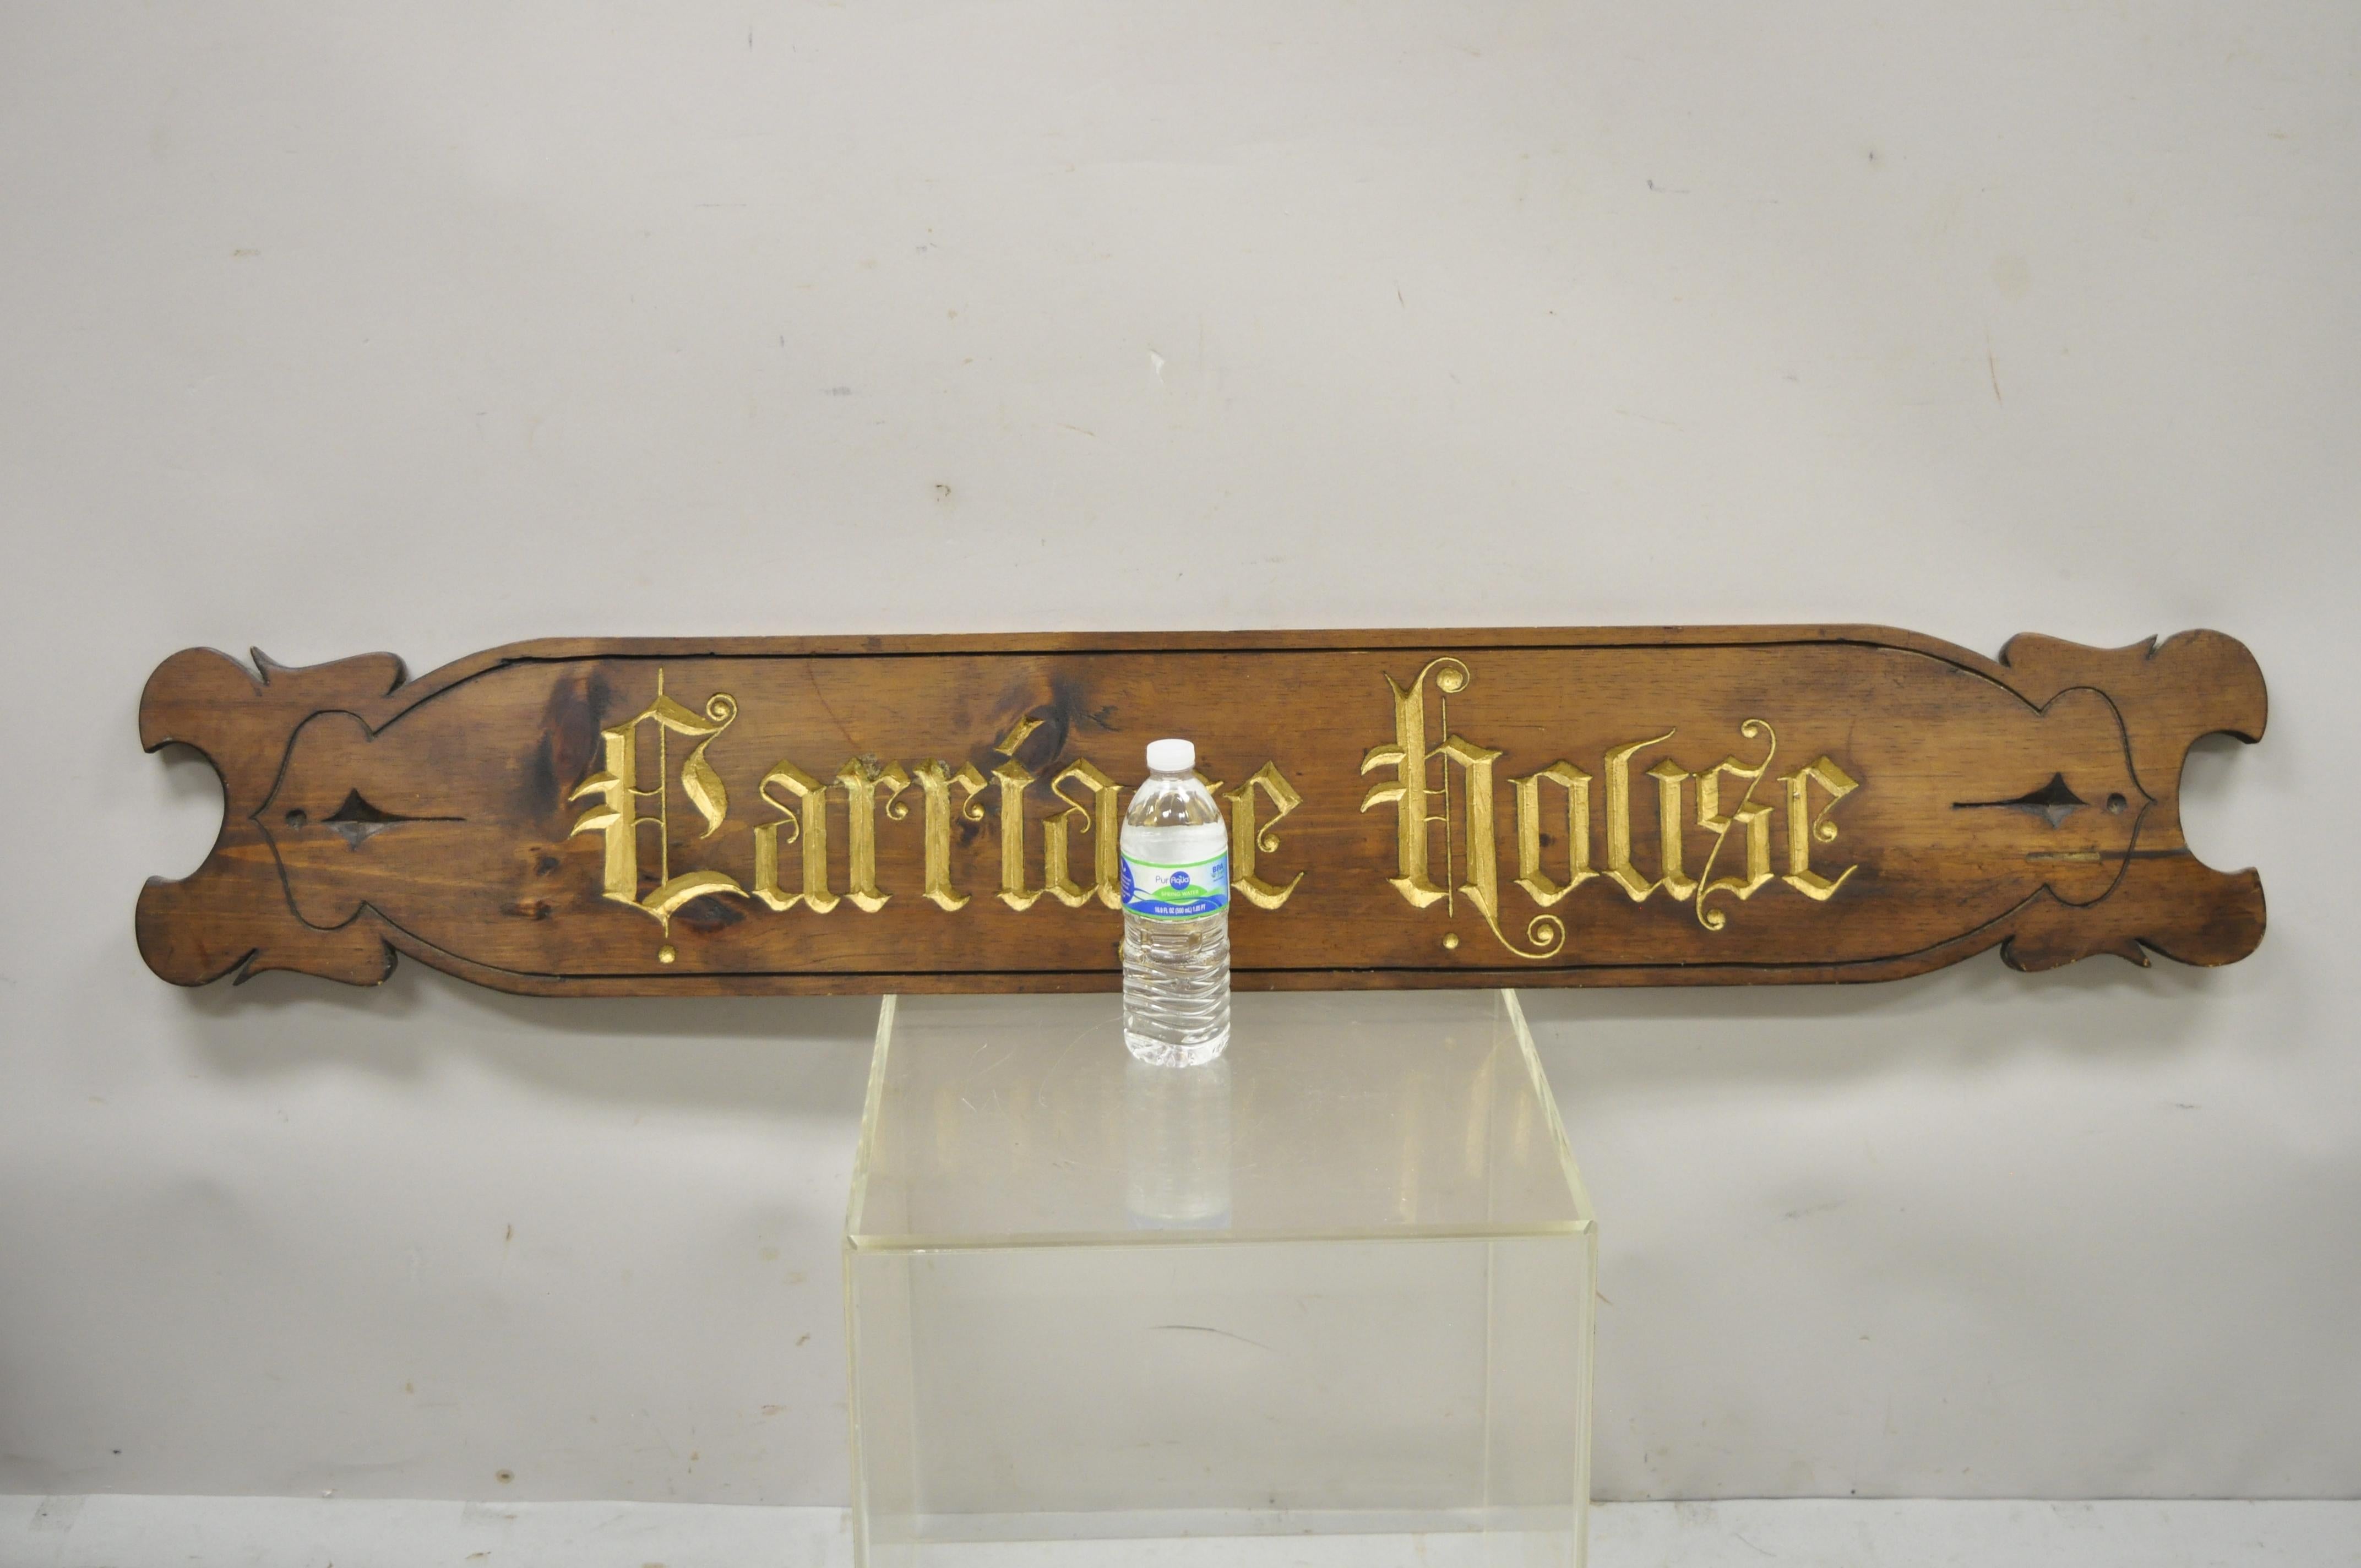 Pine Wood 53 inch Long French Country America Wall Art Carving Carriage House. Item features gold painted details, carved lettering which reads, 